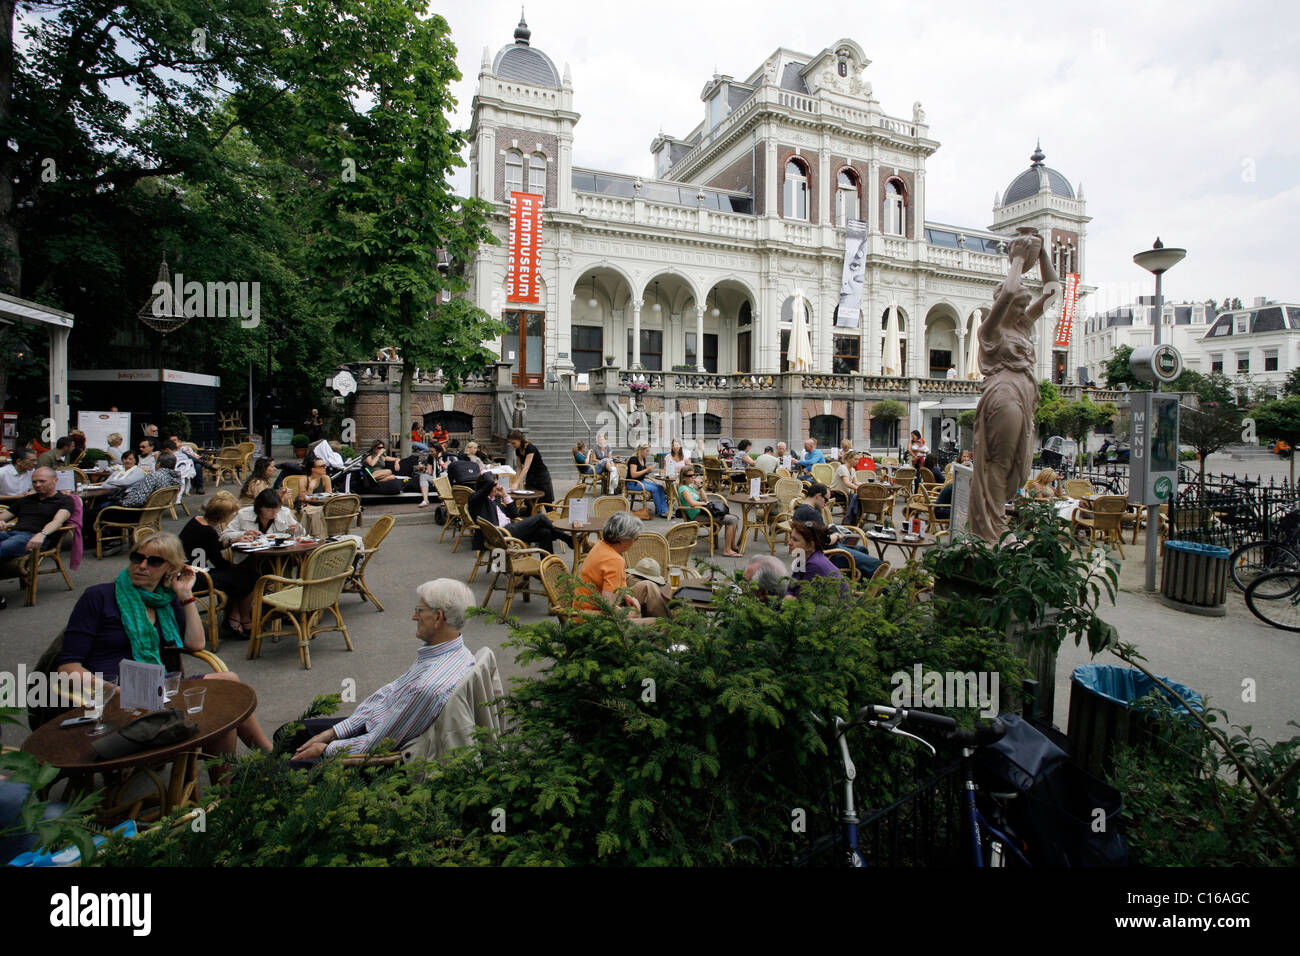 Filmmuseum building and cafe in Vondelpark, Amsterdam, the Netherlands, Europe Stock Photo